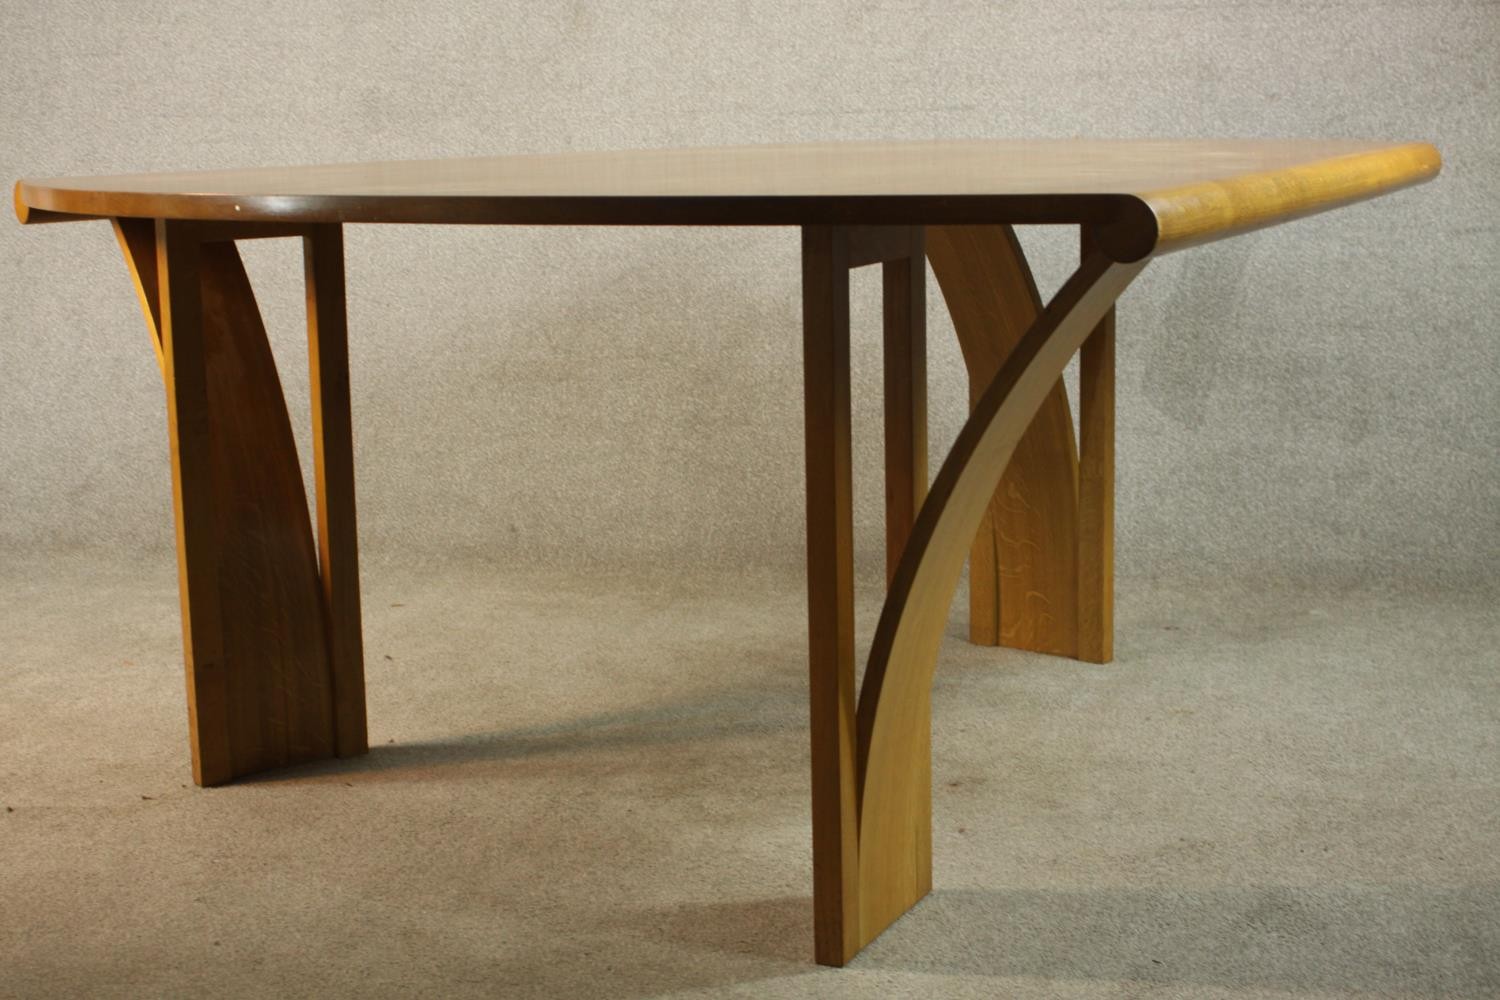 Attributed to Robert Williams (b.1942) for Pearl Dot, Islington, an oak dining table, circa 1980s, - Image 7 of 15